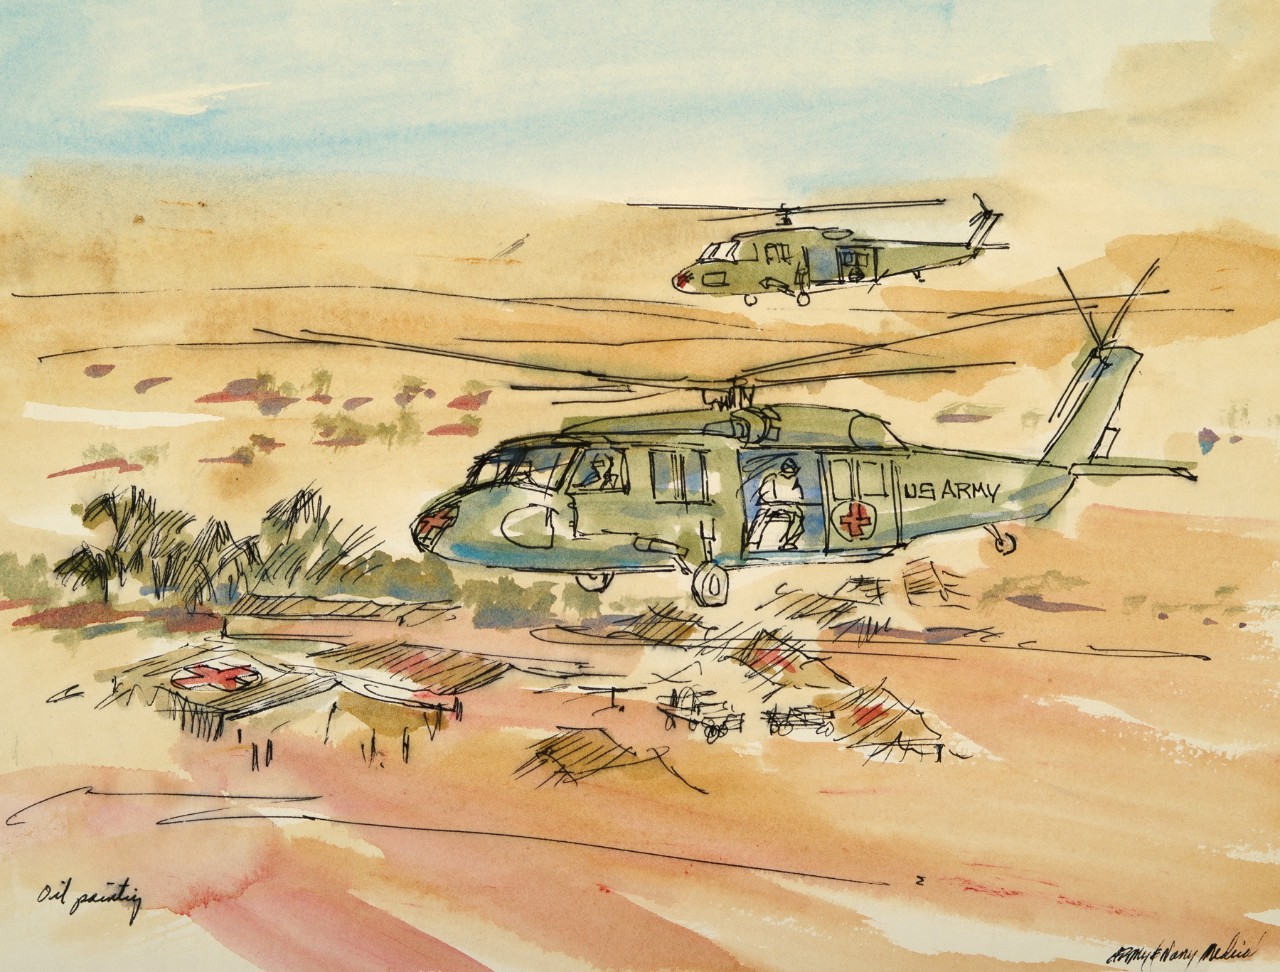 Two helicopters fly over hospital tents in the desert